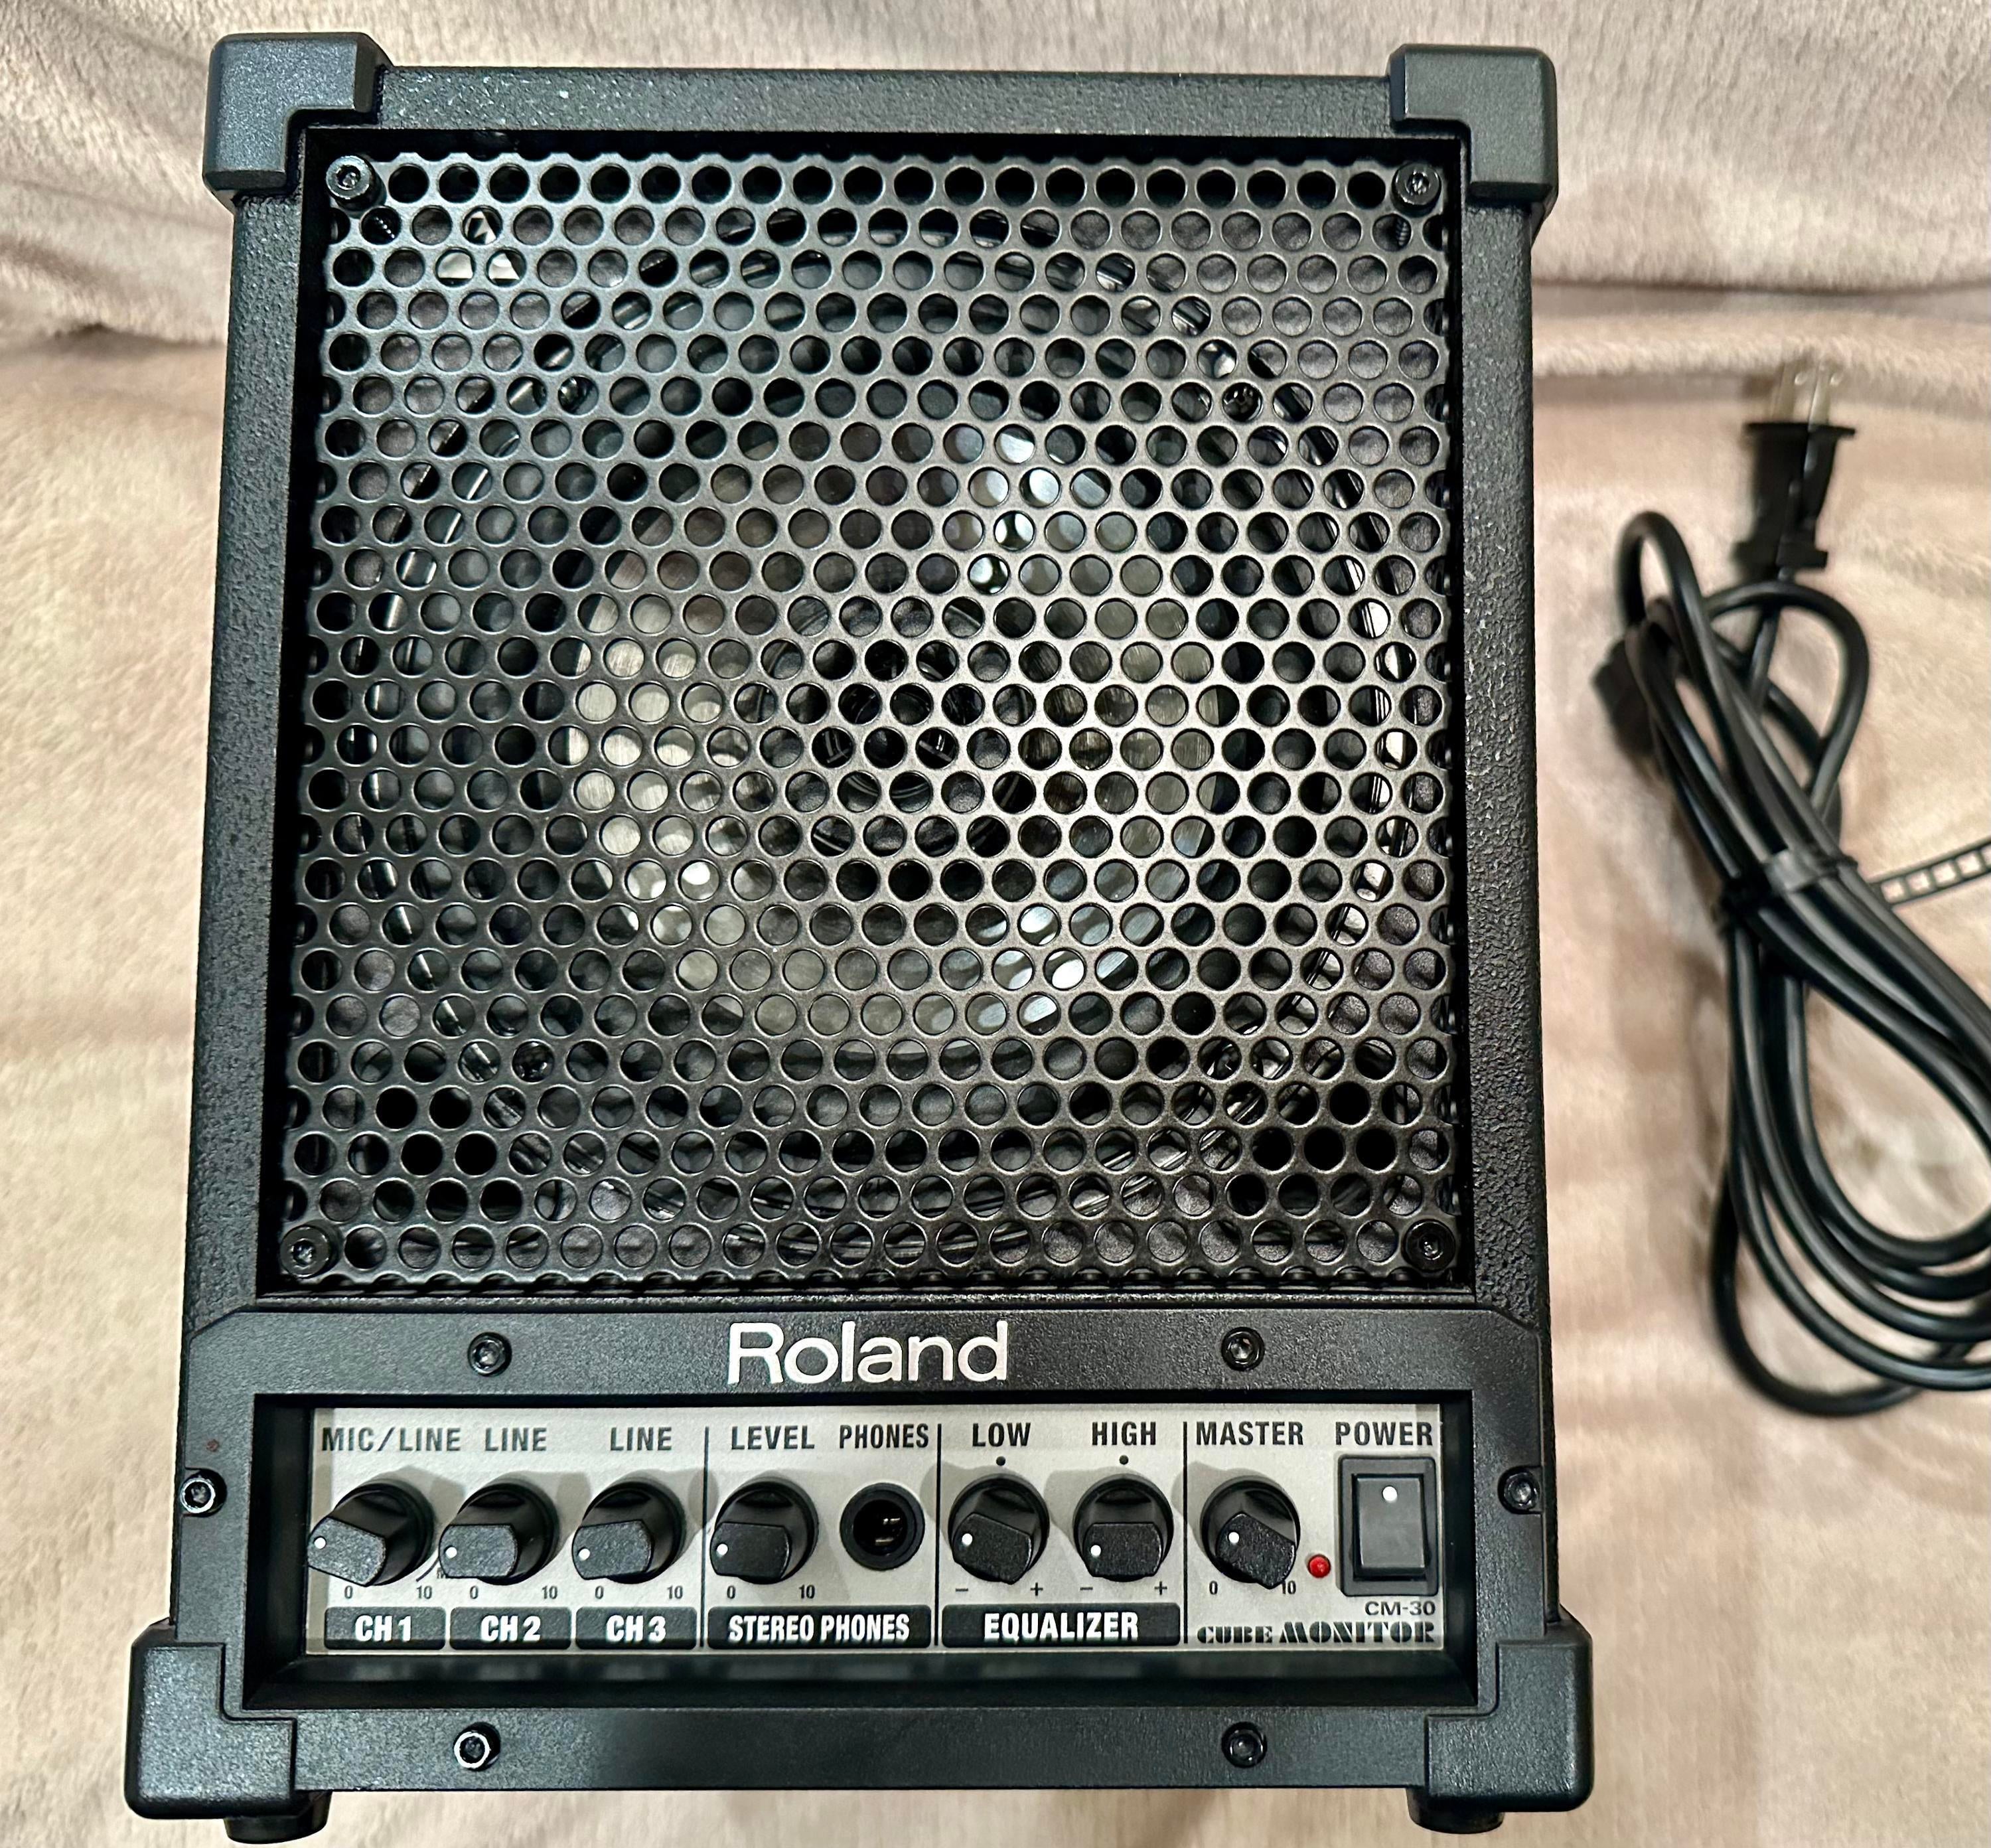 Used Roland CM-30 CUBE 30W 6.5 inch 2-way - Sweetwater's Gear Exchange